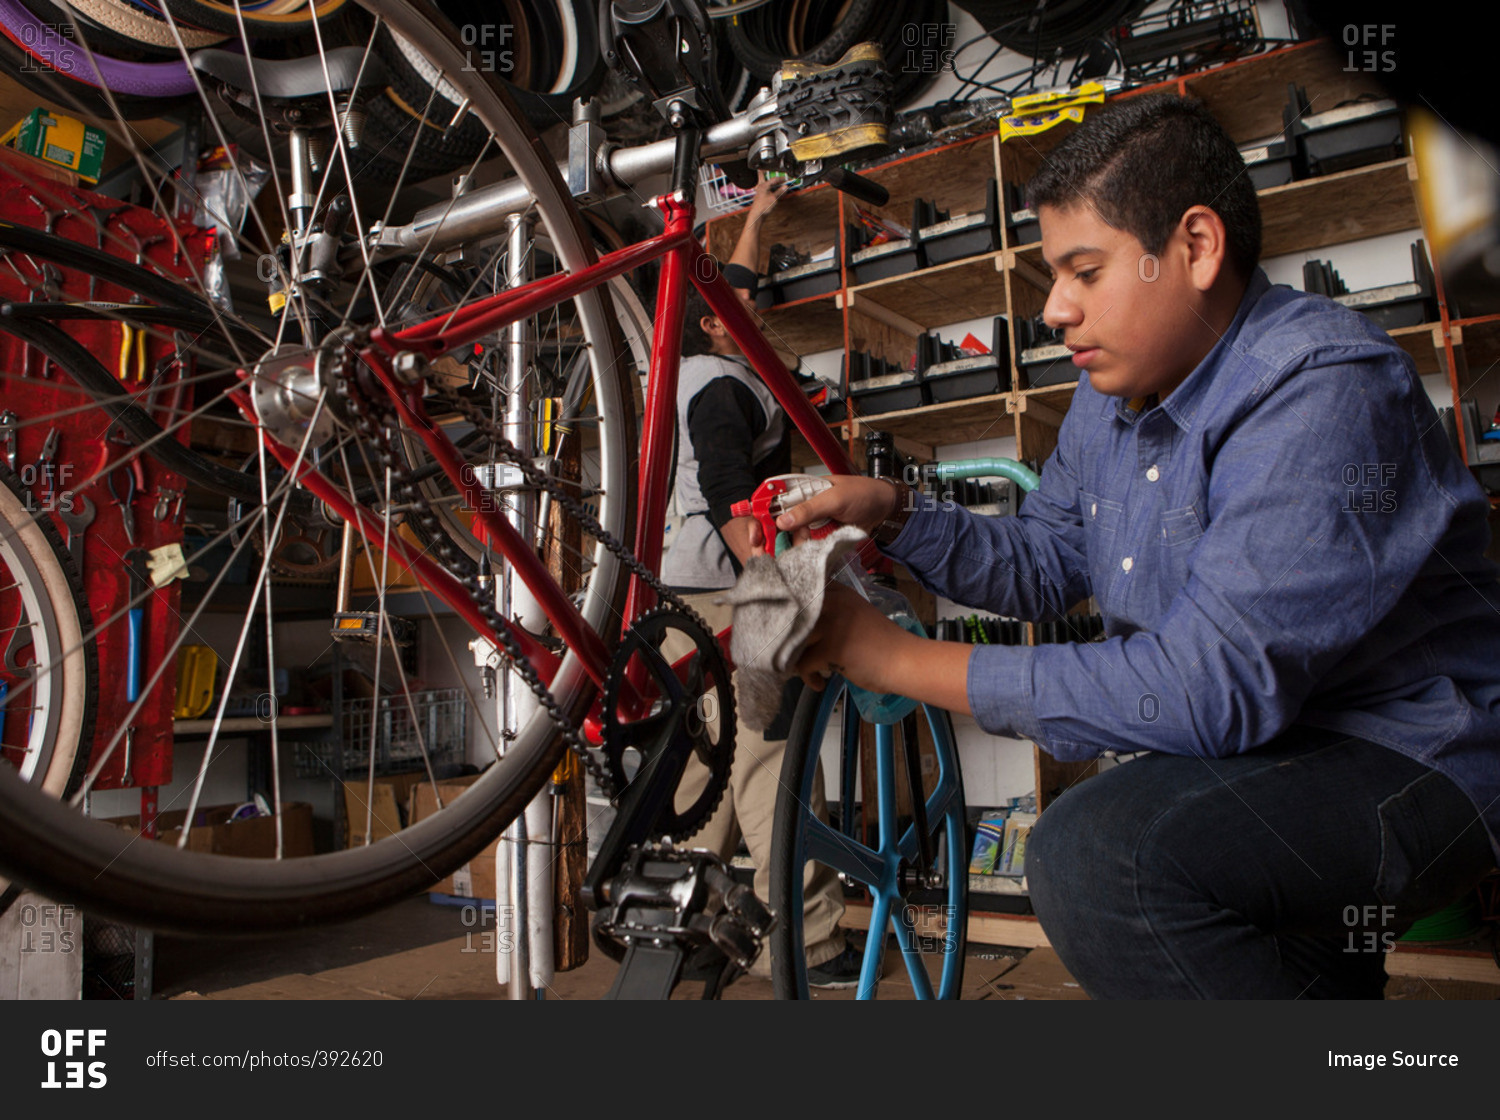 Profile of a mechanic working in bicycle shop